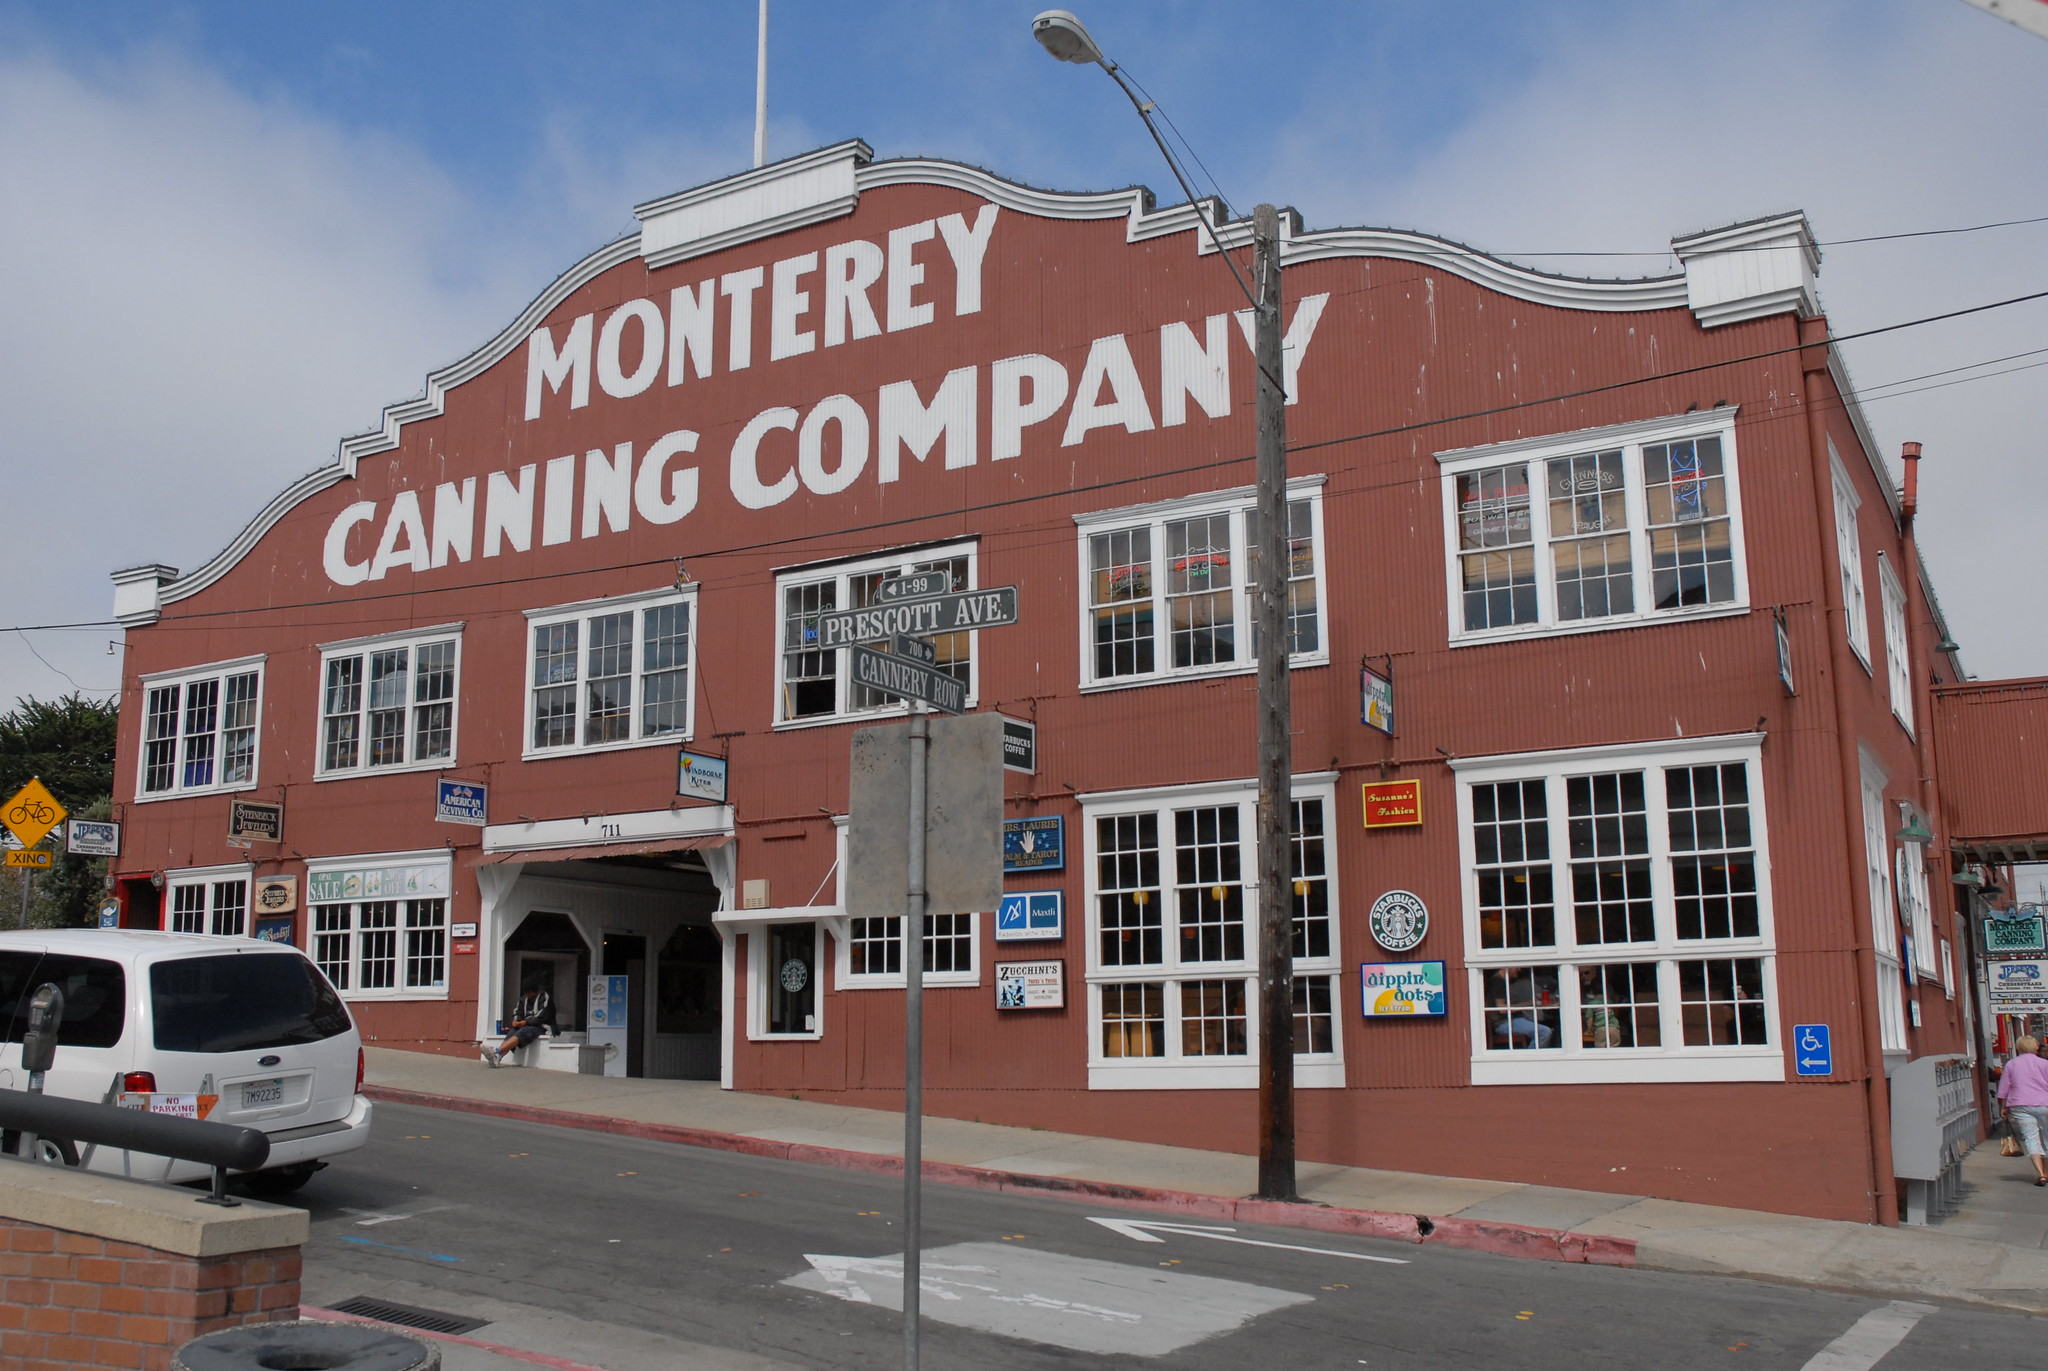 The Canning Company building in Monterey